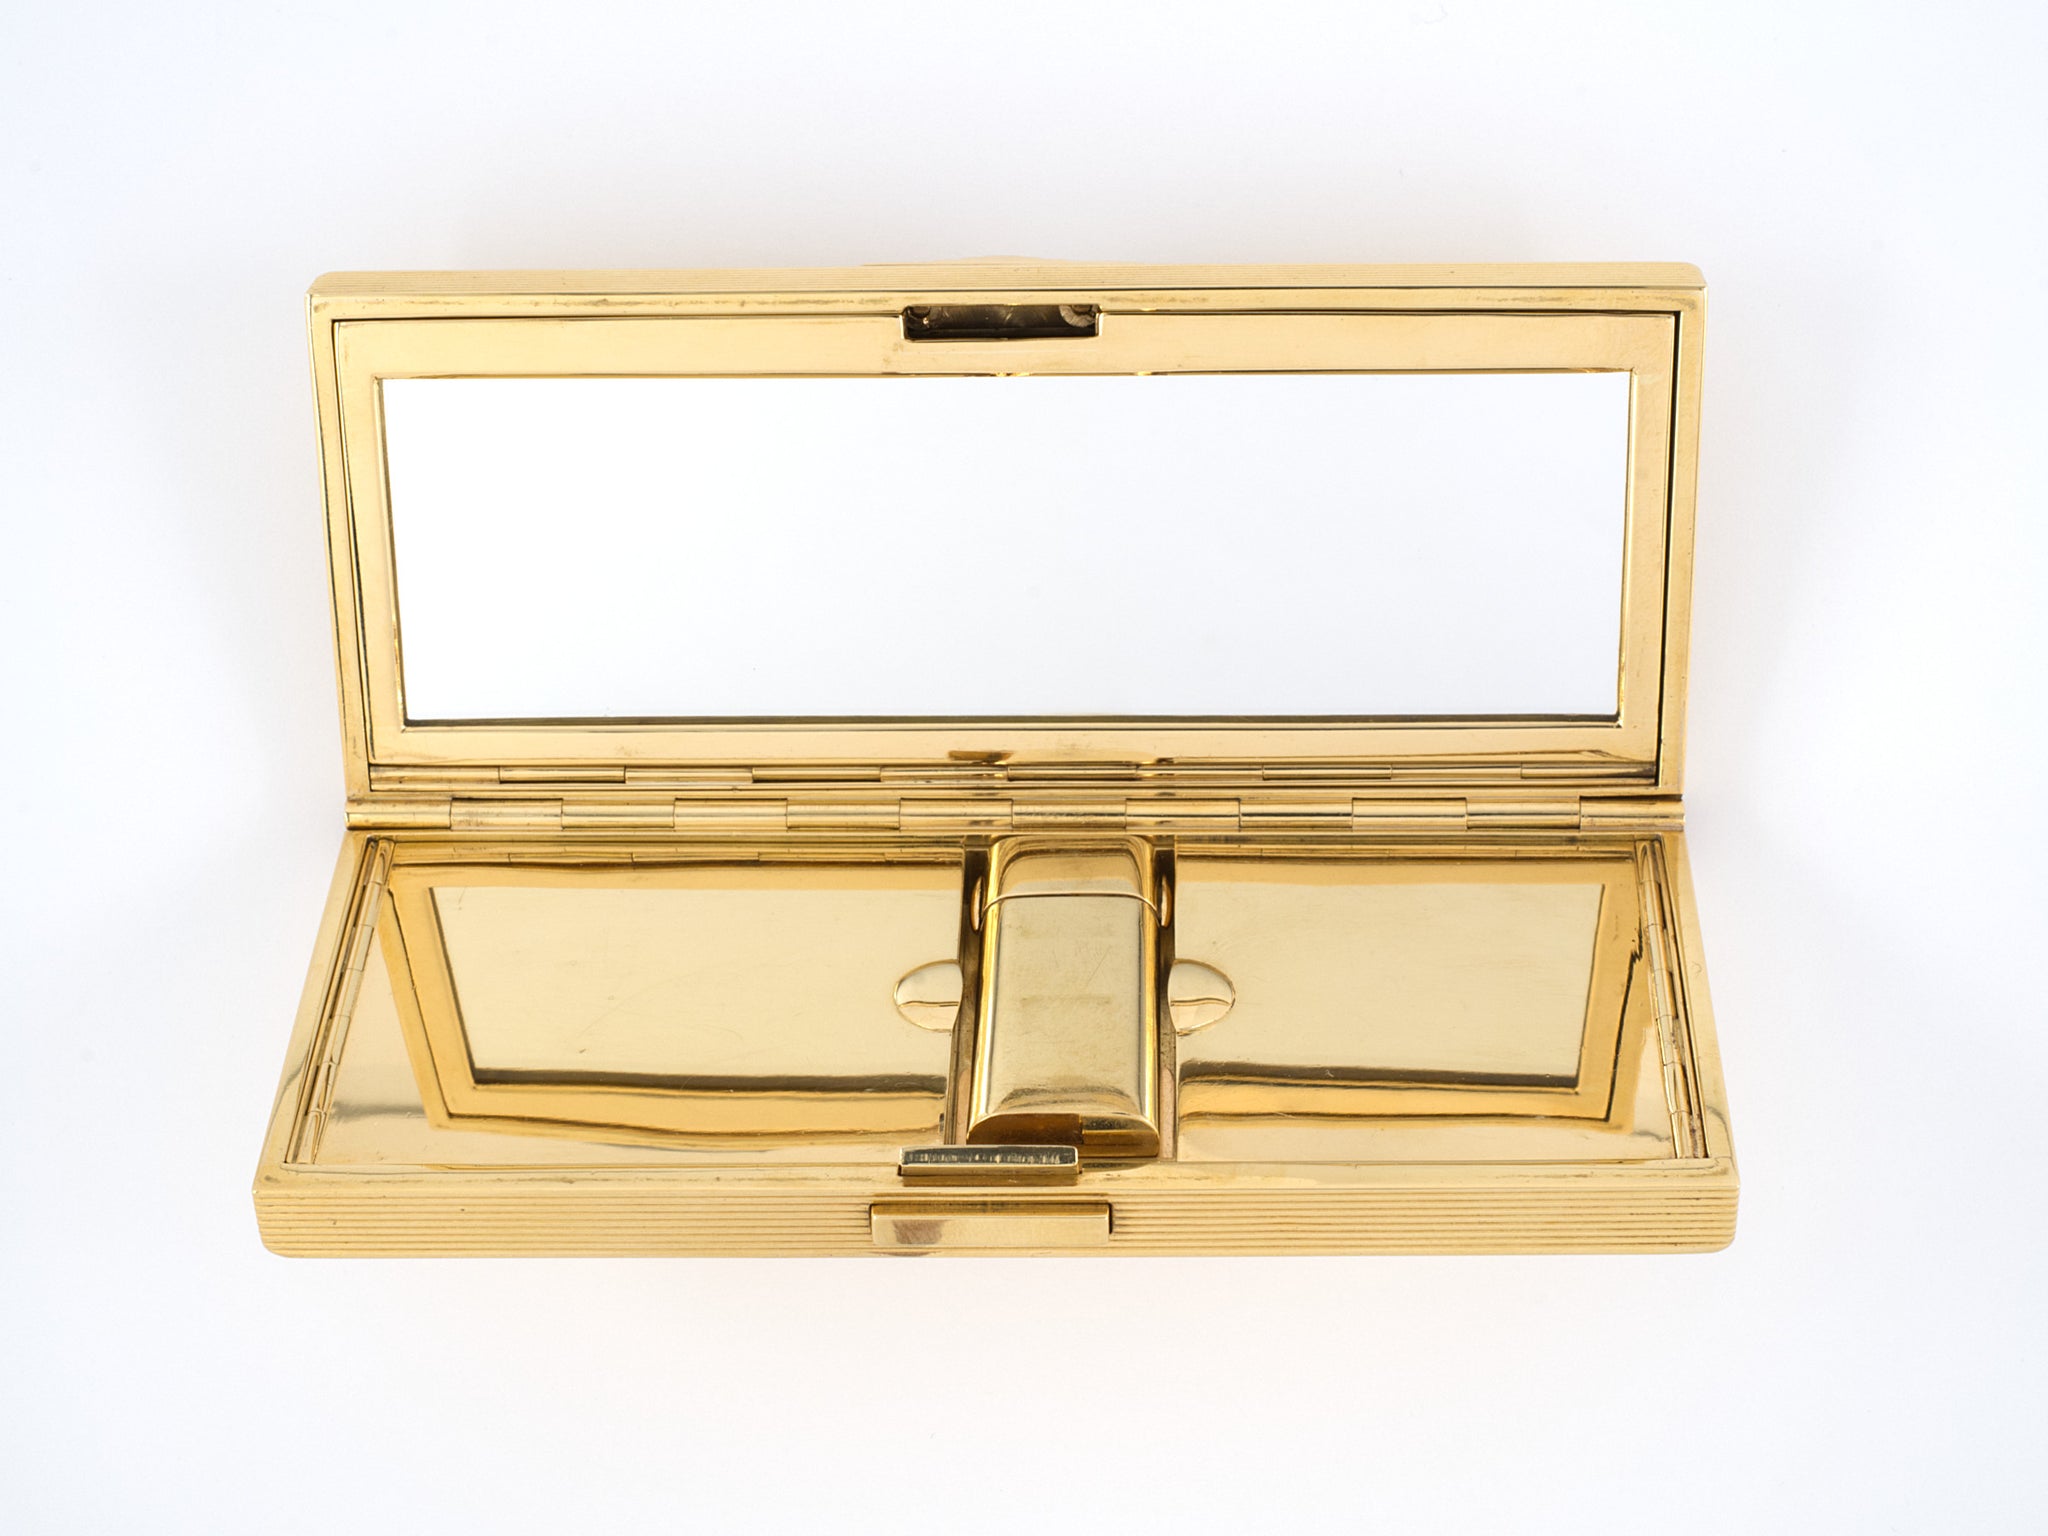 A GOLD AND RUBY LIPSTICK HOLDER, BY CARTIER